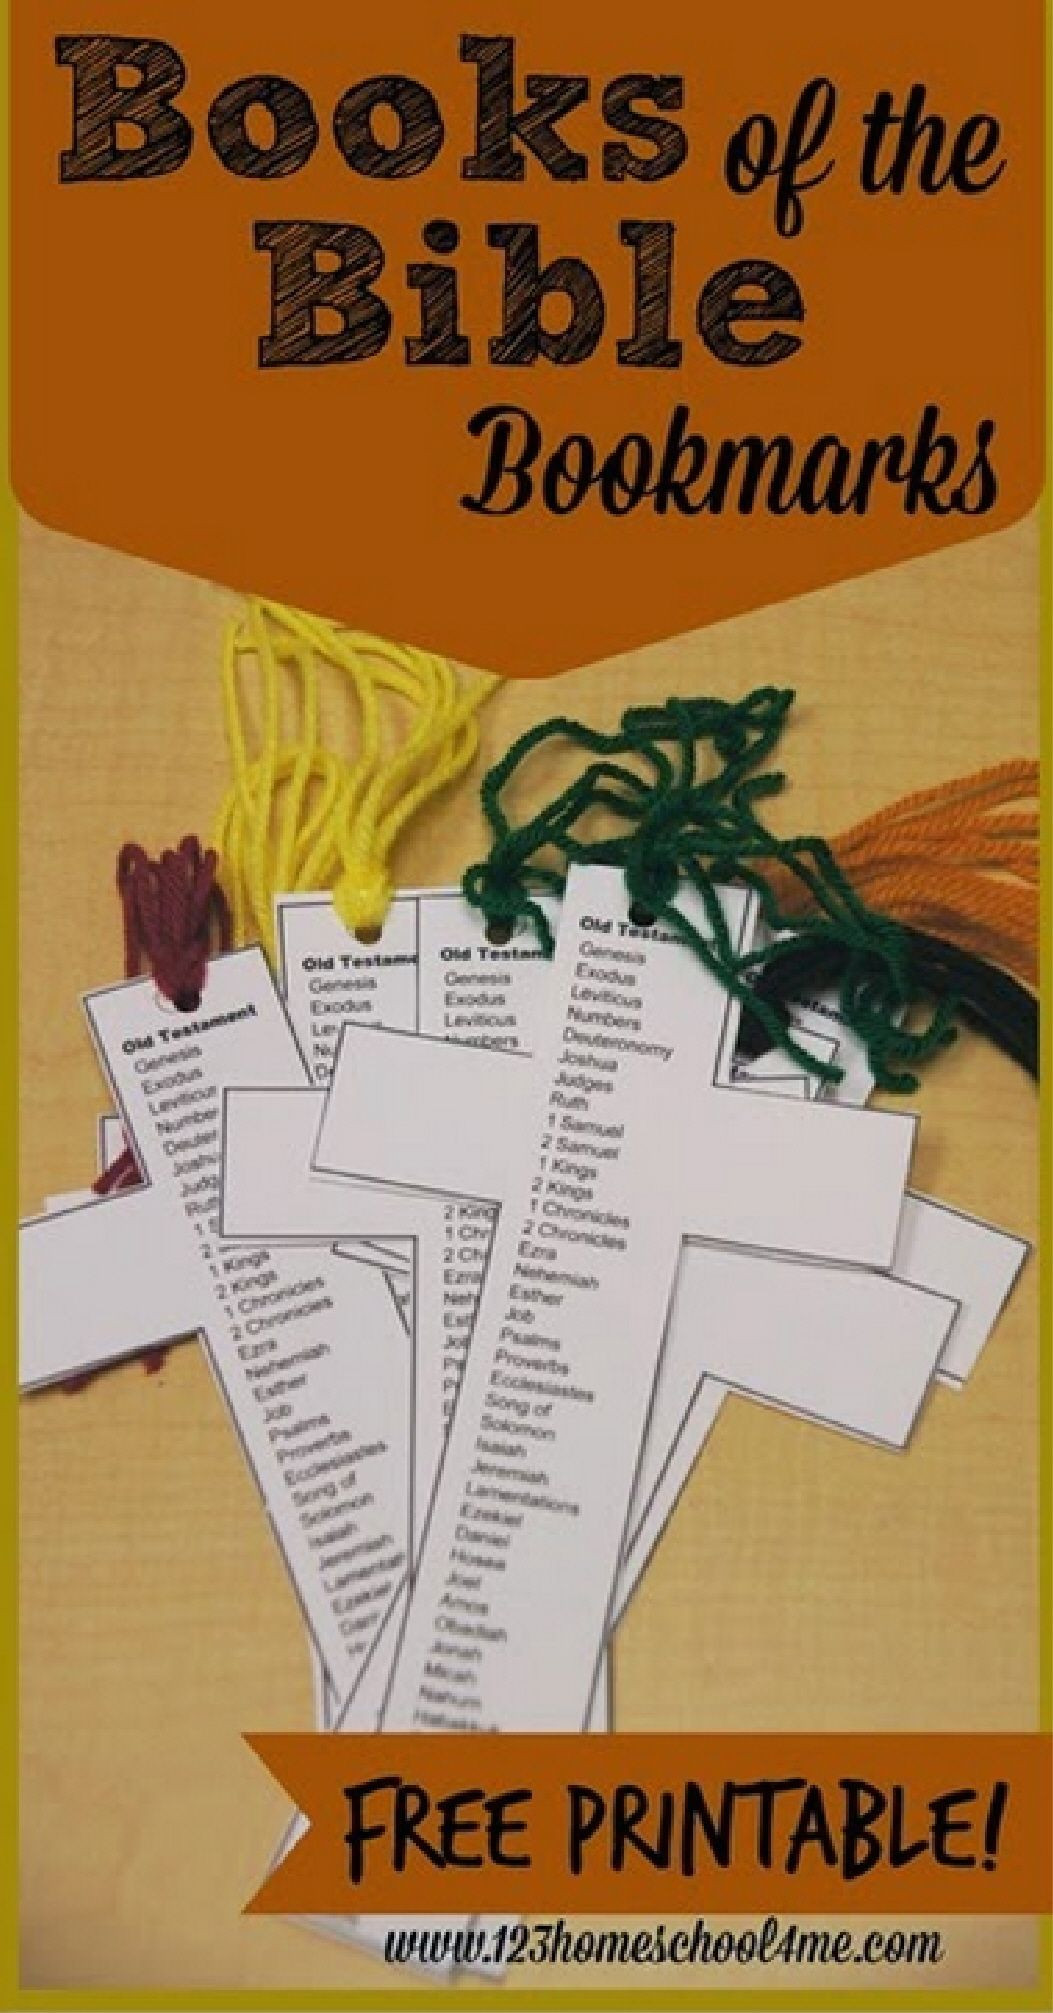 Bible Crafts For Adults
 Best 25 Adult sunday school lessons ideas on Pinterest